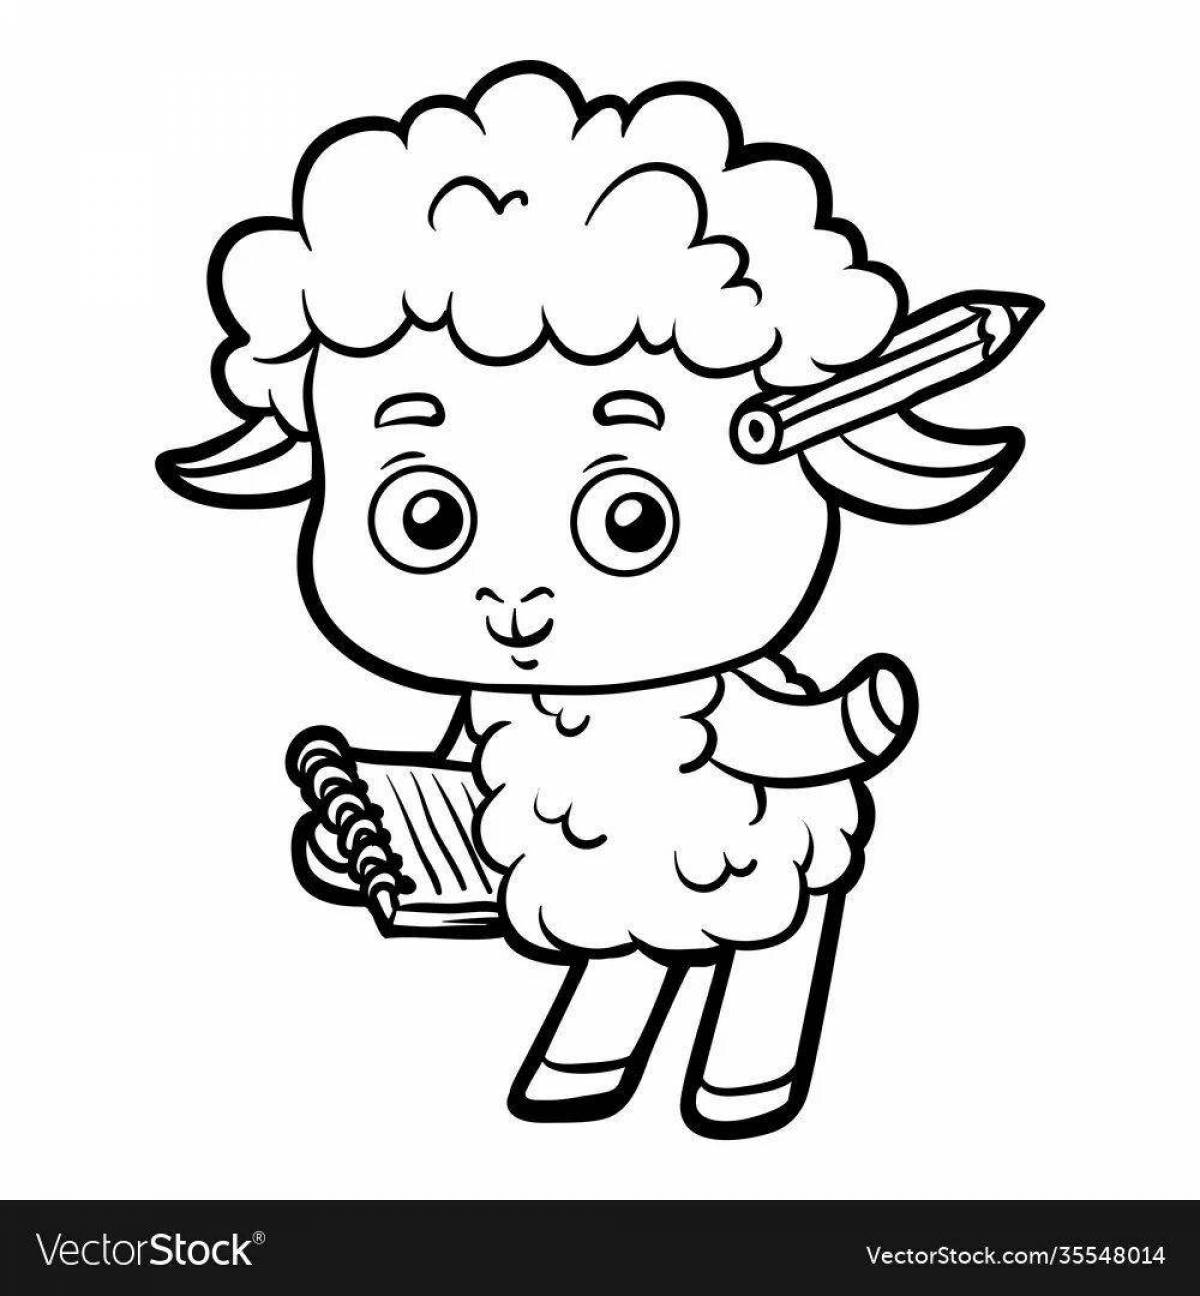 Creative sheep coloring book for 5-6 year olds